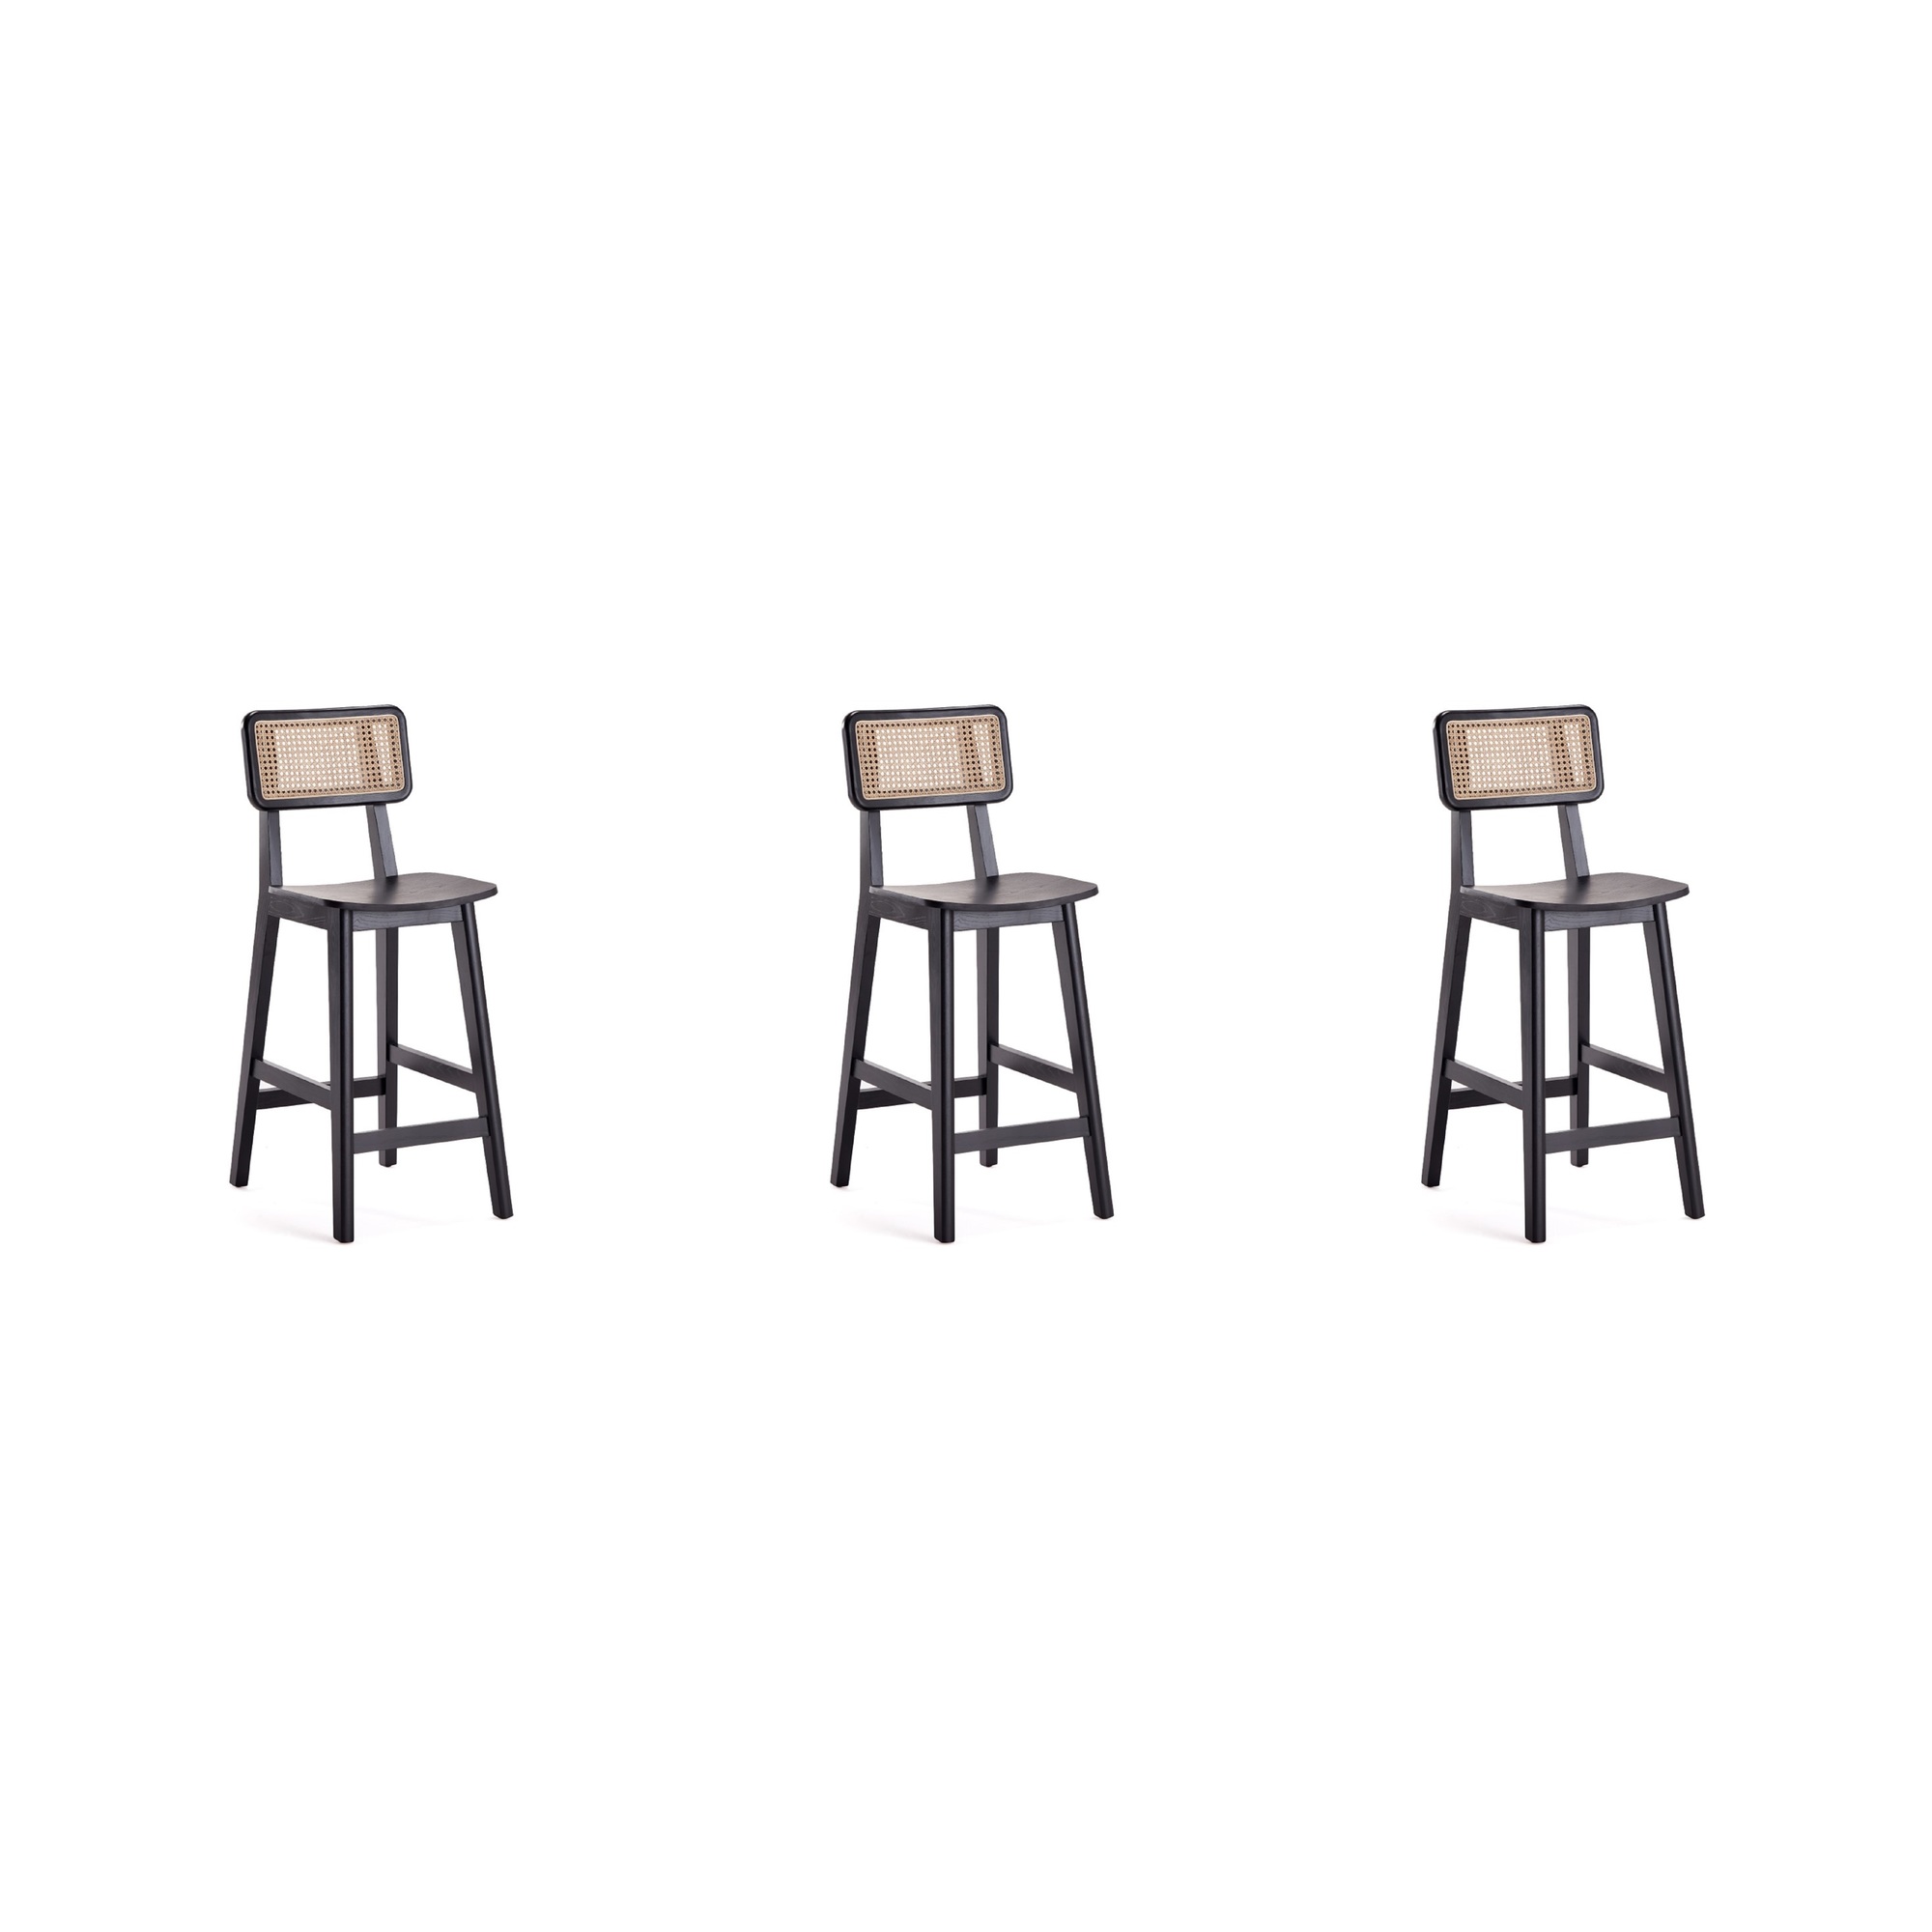 Manhattan Comfort, Versailles Stool Black and Natural Cane Set of 3 Primary Color Black, Included (qty.) 3 Model 3-CSCA01